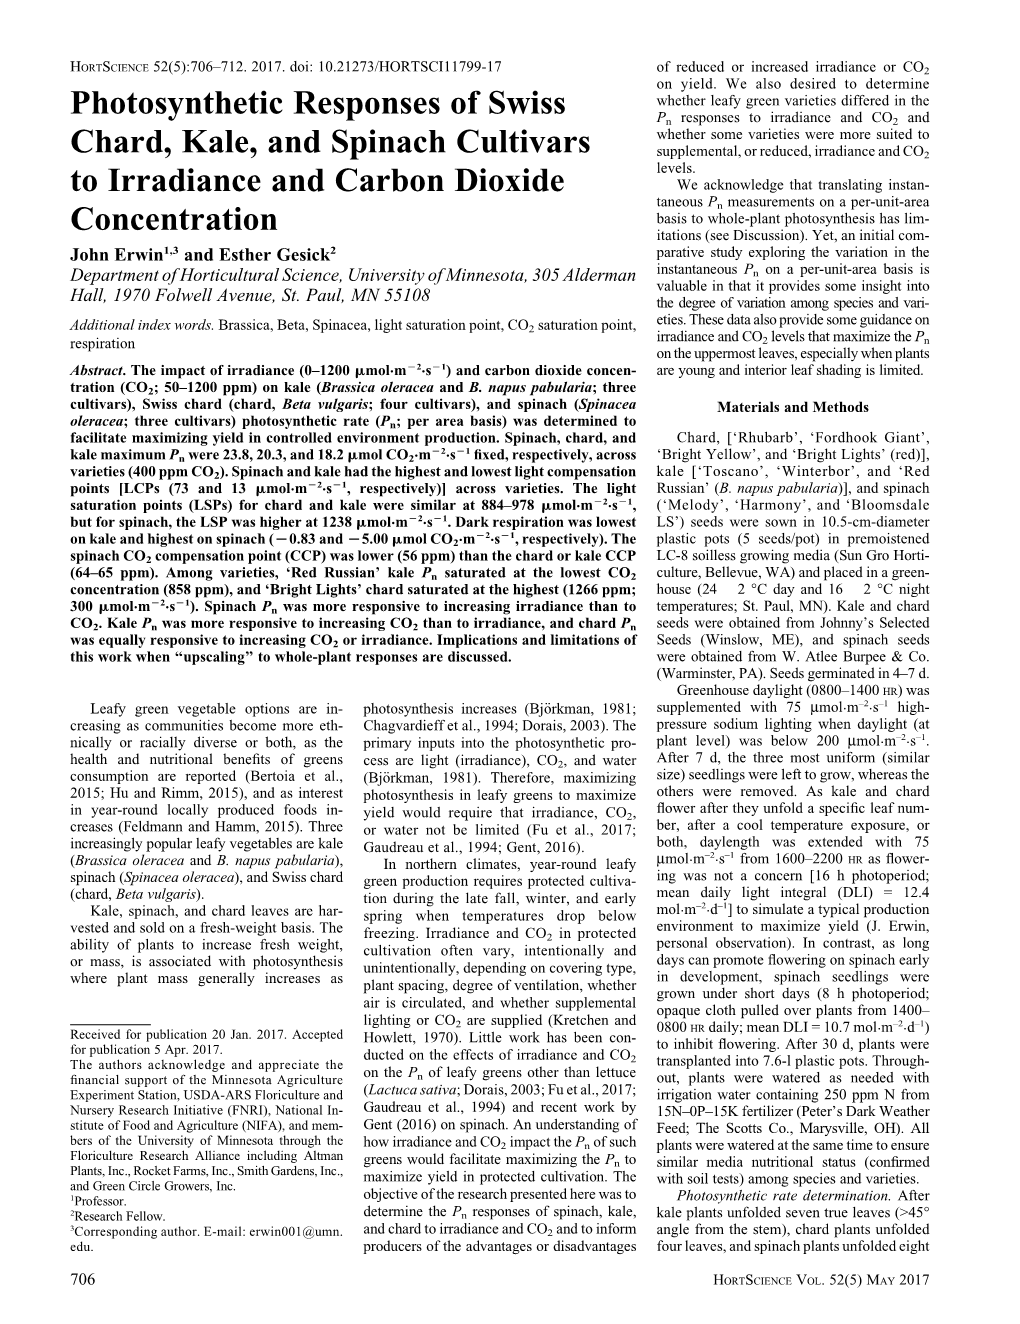 Photosynthetic Responses of Swiss Chard, Kale, and Spinach Cultivars to Irradiance and Carbon Dioxide Concentration